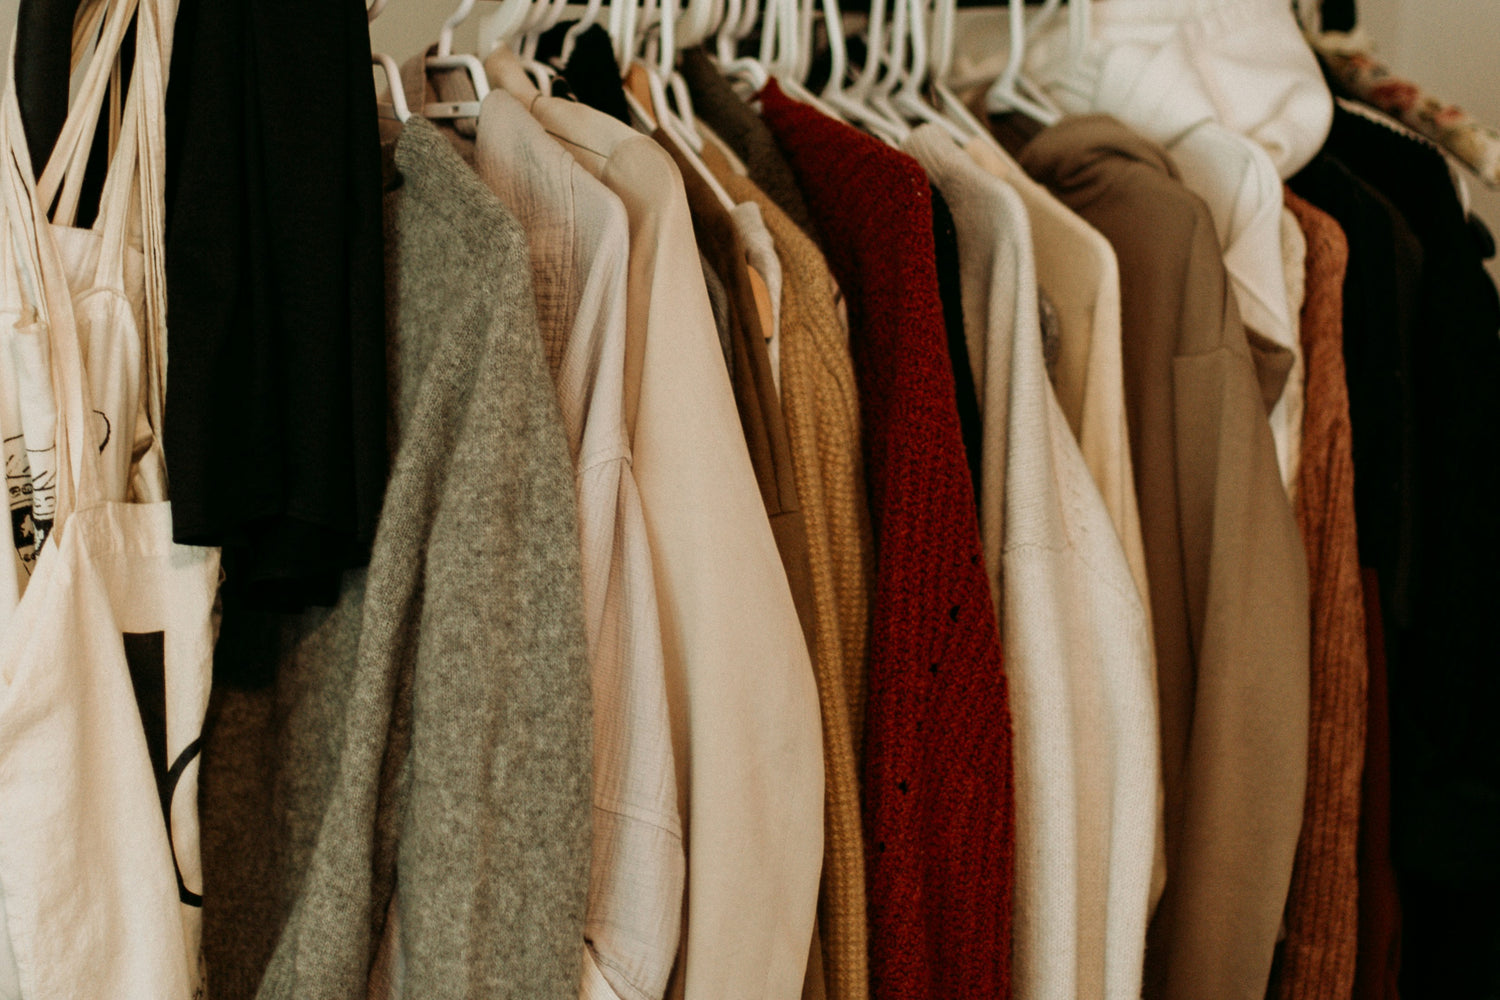 Earth-toned clothes hanging on a clothing rack